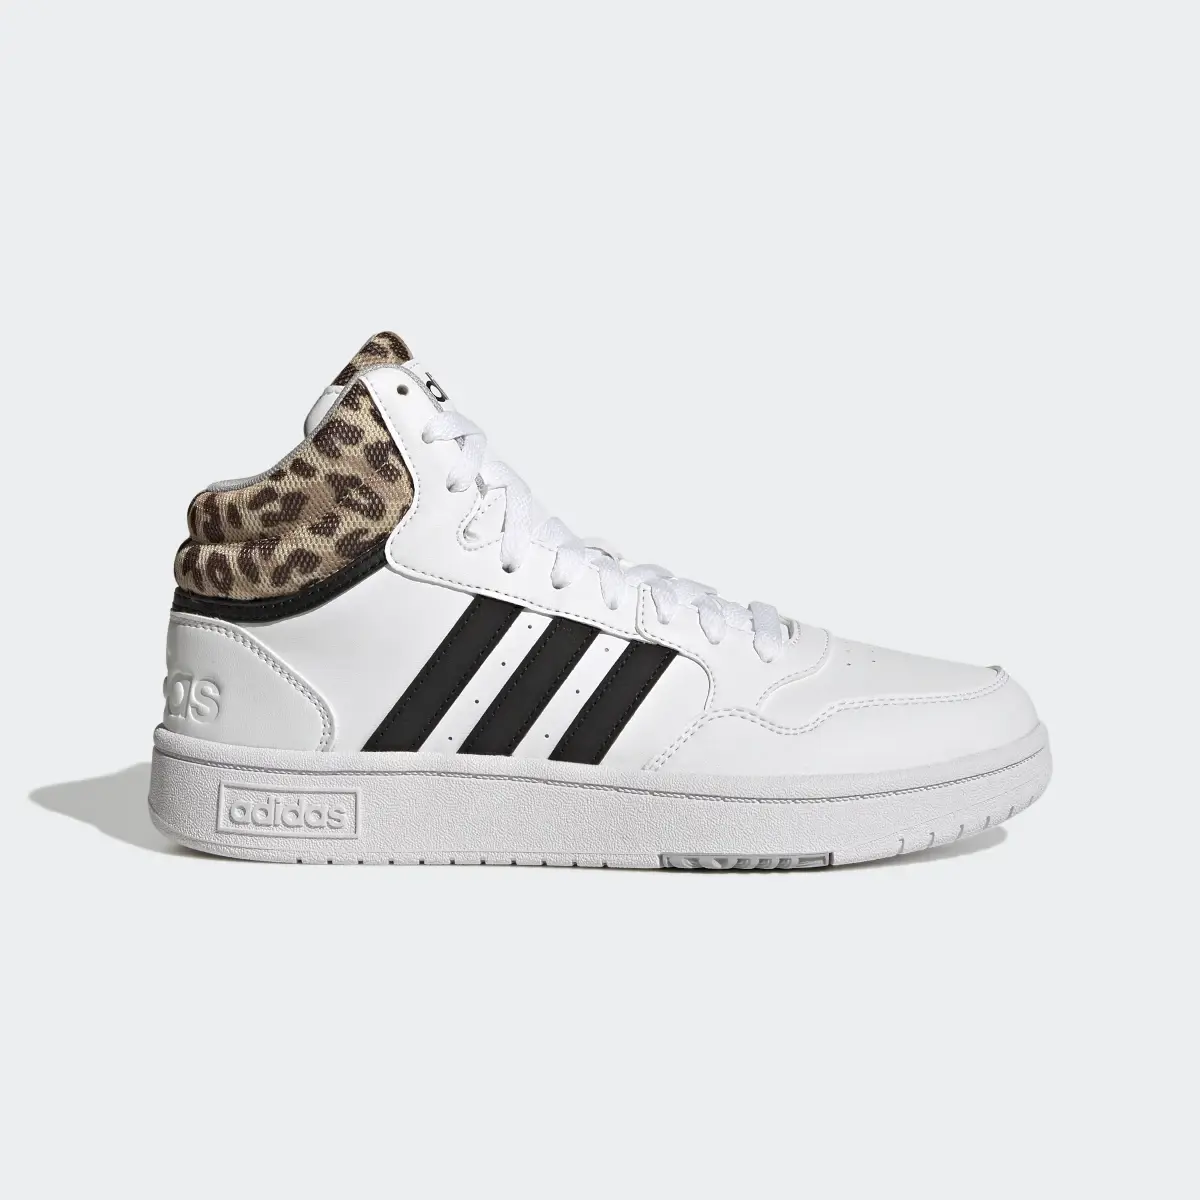 Adidas Hoops 3.0 Lifestyle Basketball Mid Classic Schuh. 2